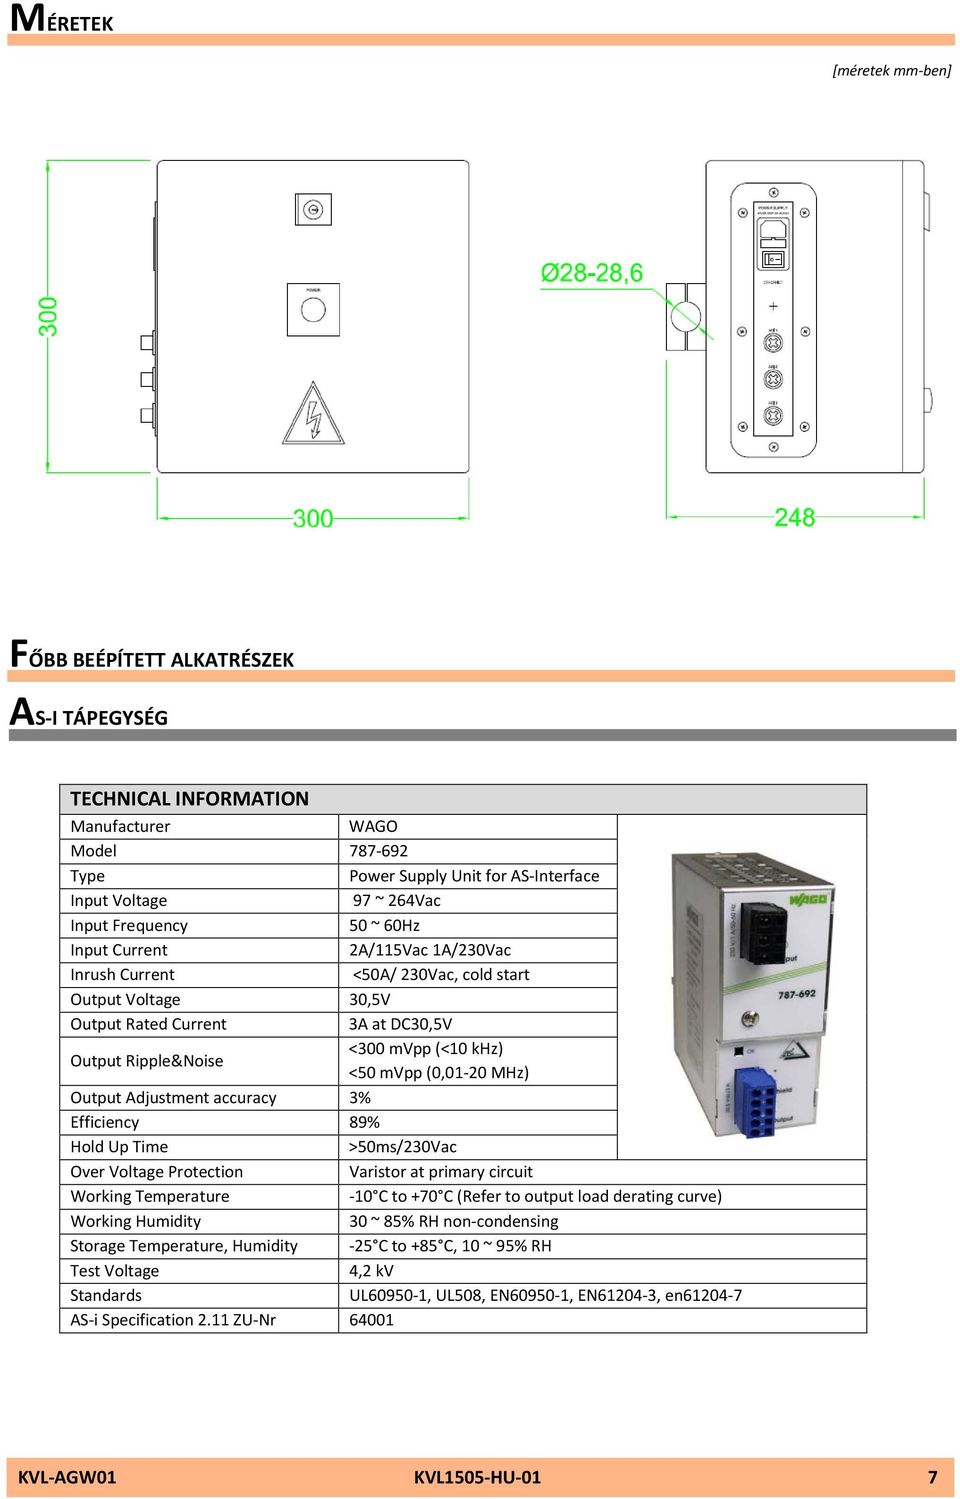 (0,01-20 MHz) Output Adjustment accuracy 3% Efficiency 89% Hold Up Time >50ms/230Vac Over Voltage Protection Varistor at primary circuit Working Temperature -10 C to +70 C (Refer to output load